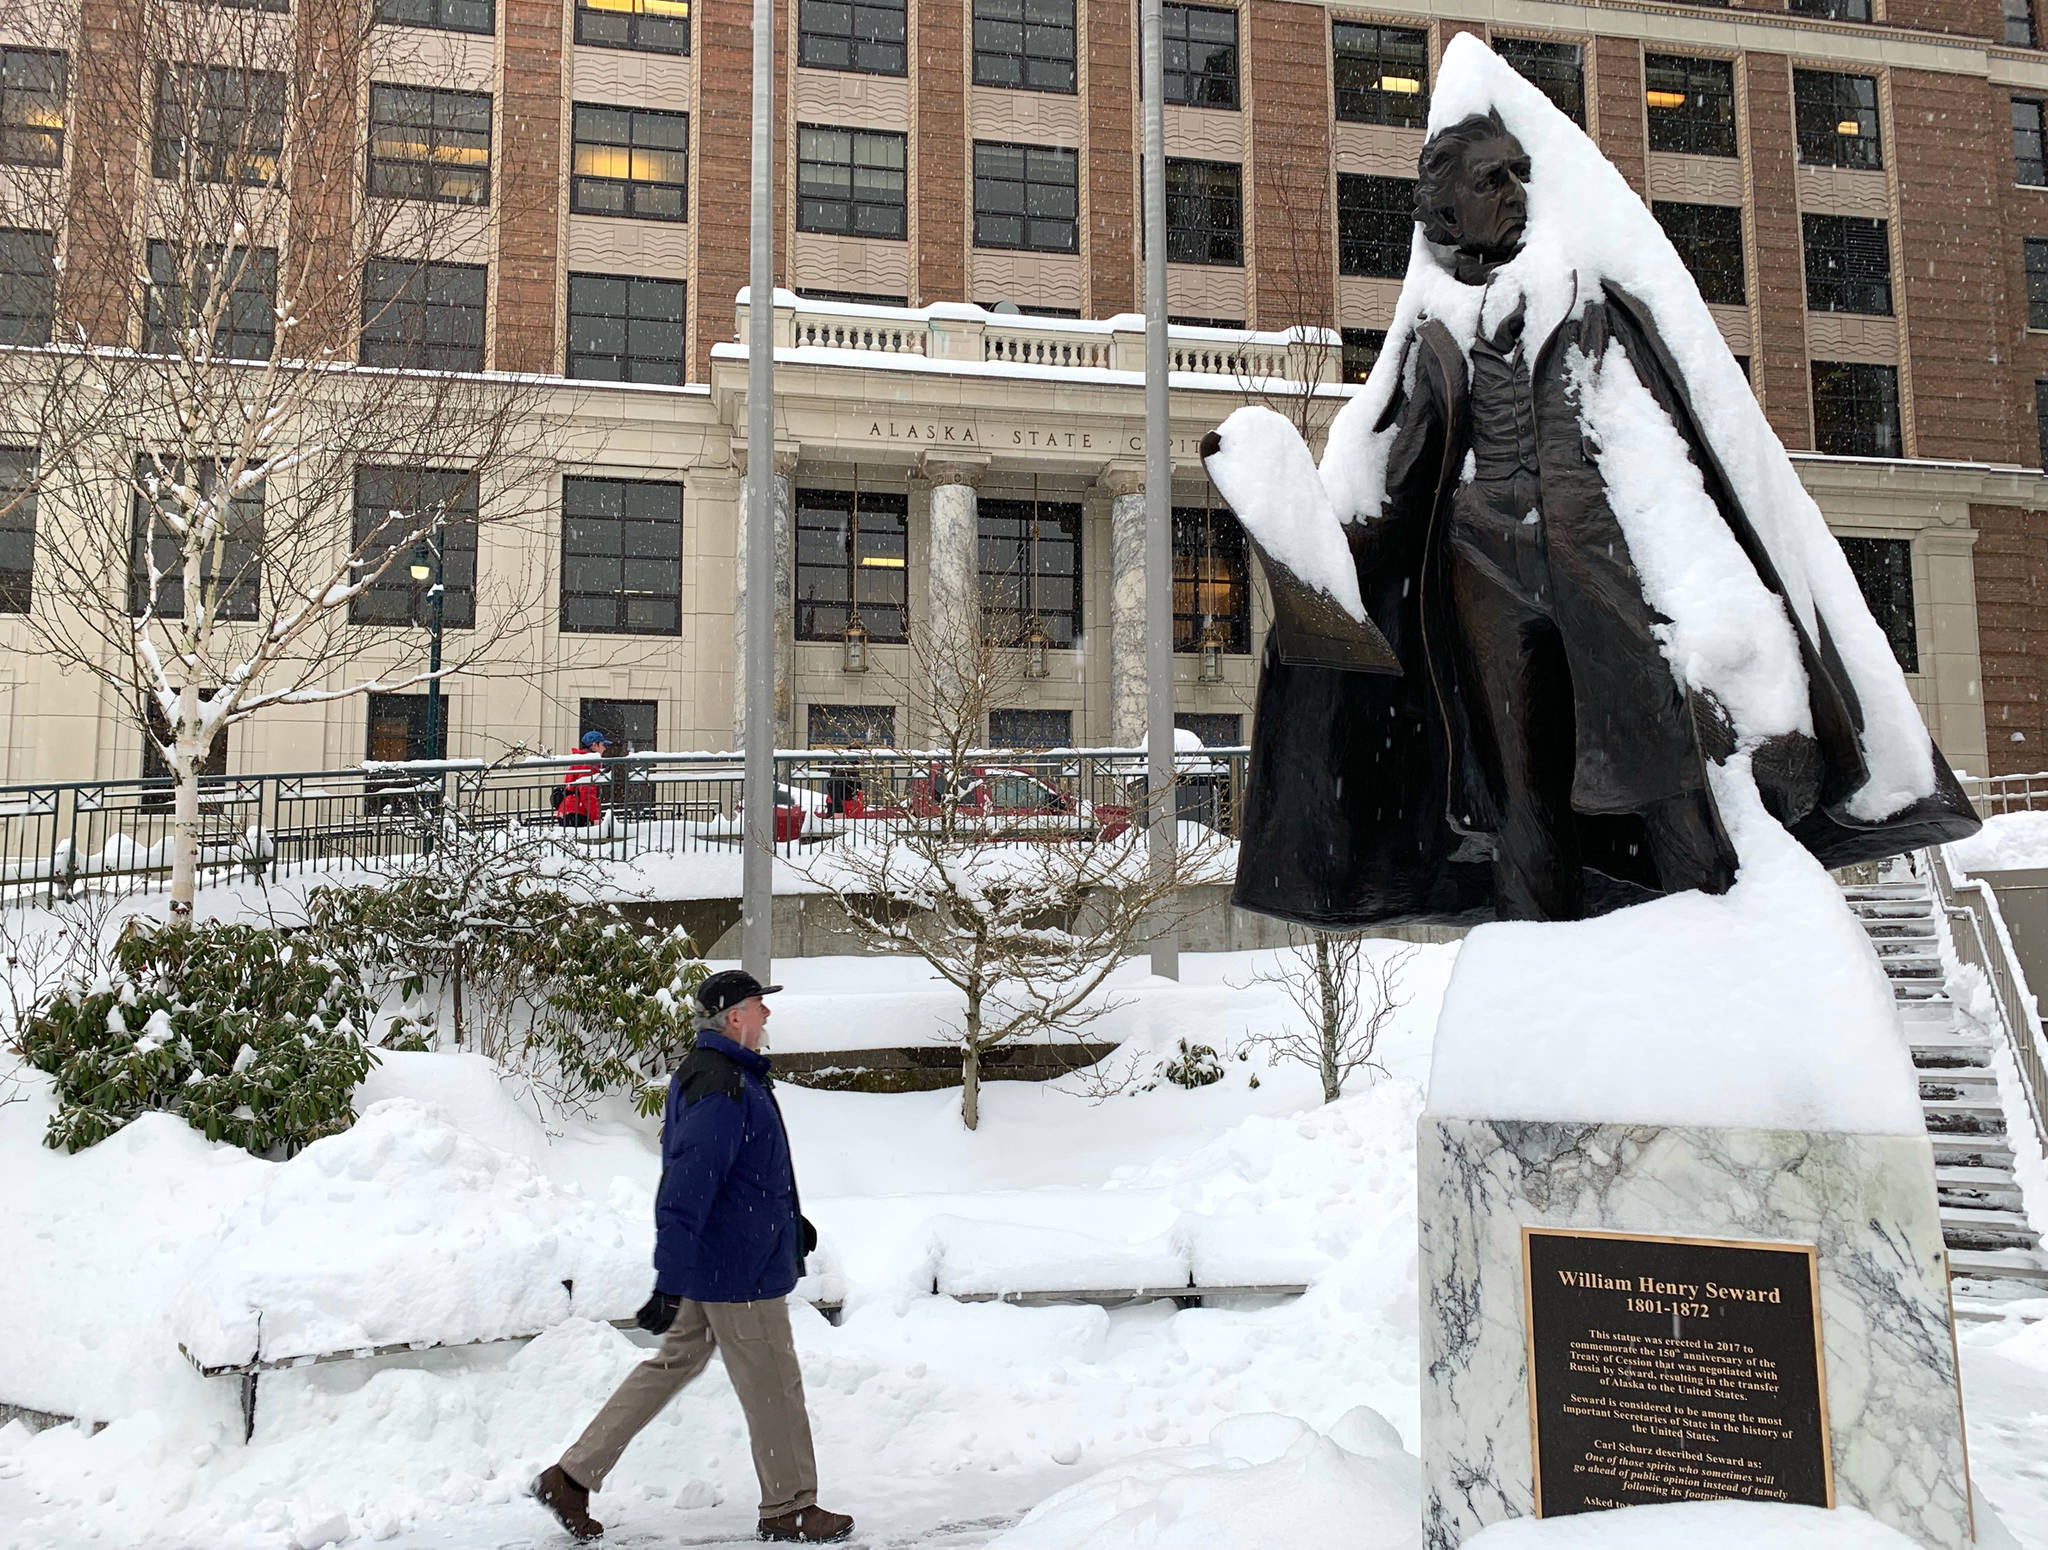 Snow coats the William Henry Seward statue outside of the Alaska State Capitol on Friday. (Angelo Saggiomo/Juneau Empire)